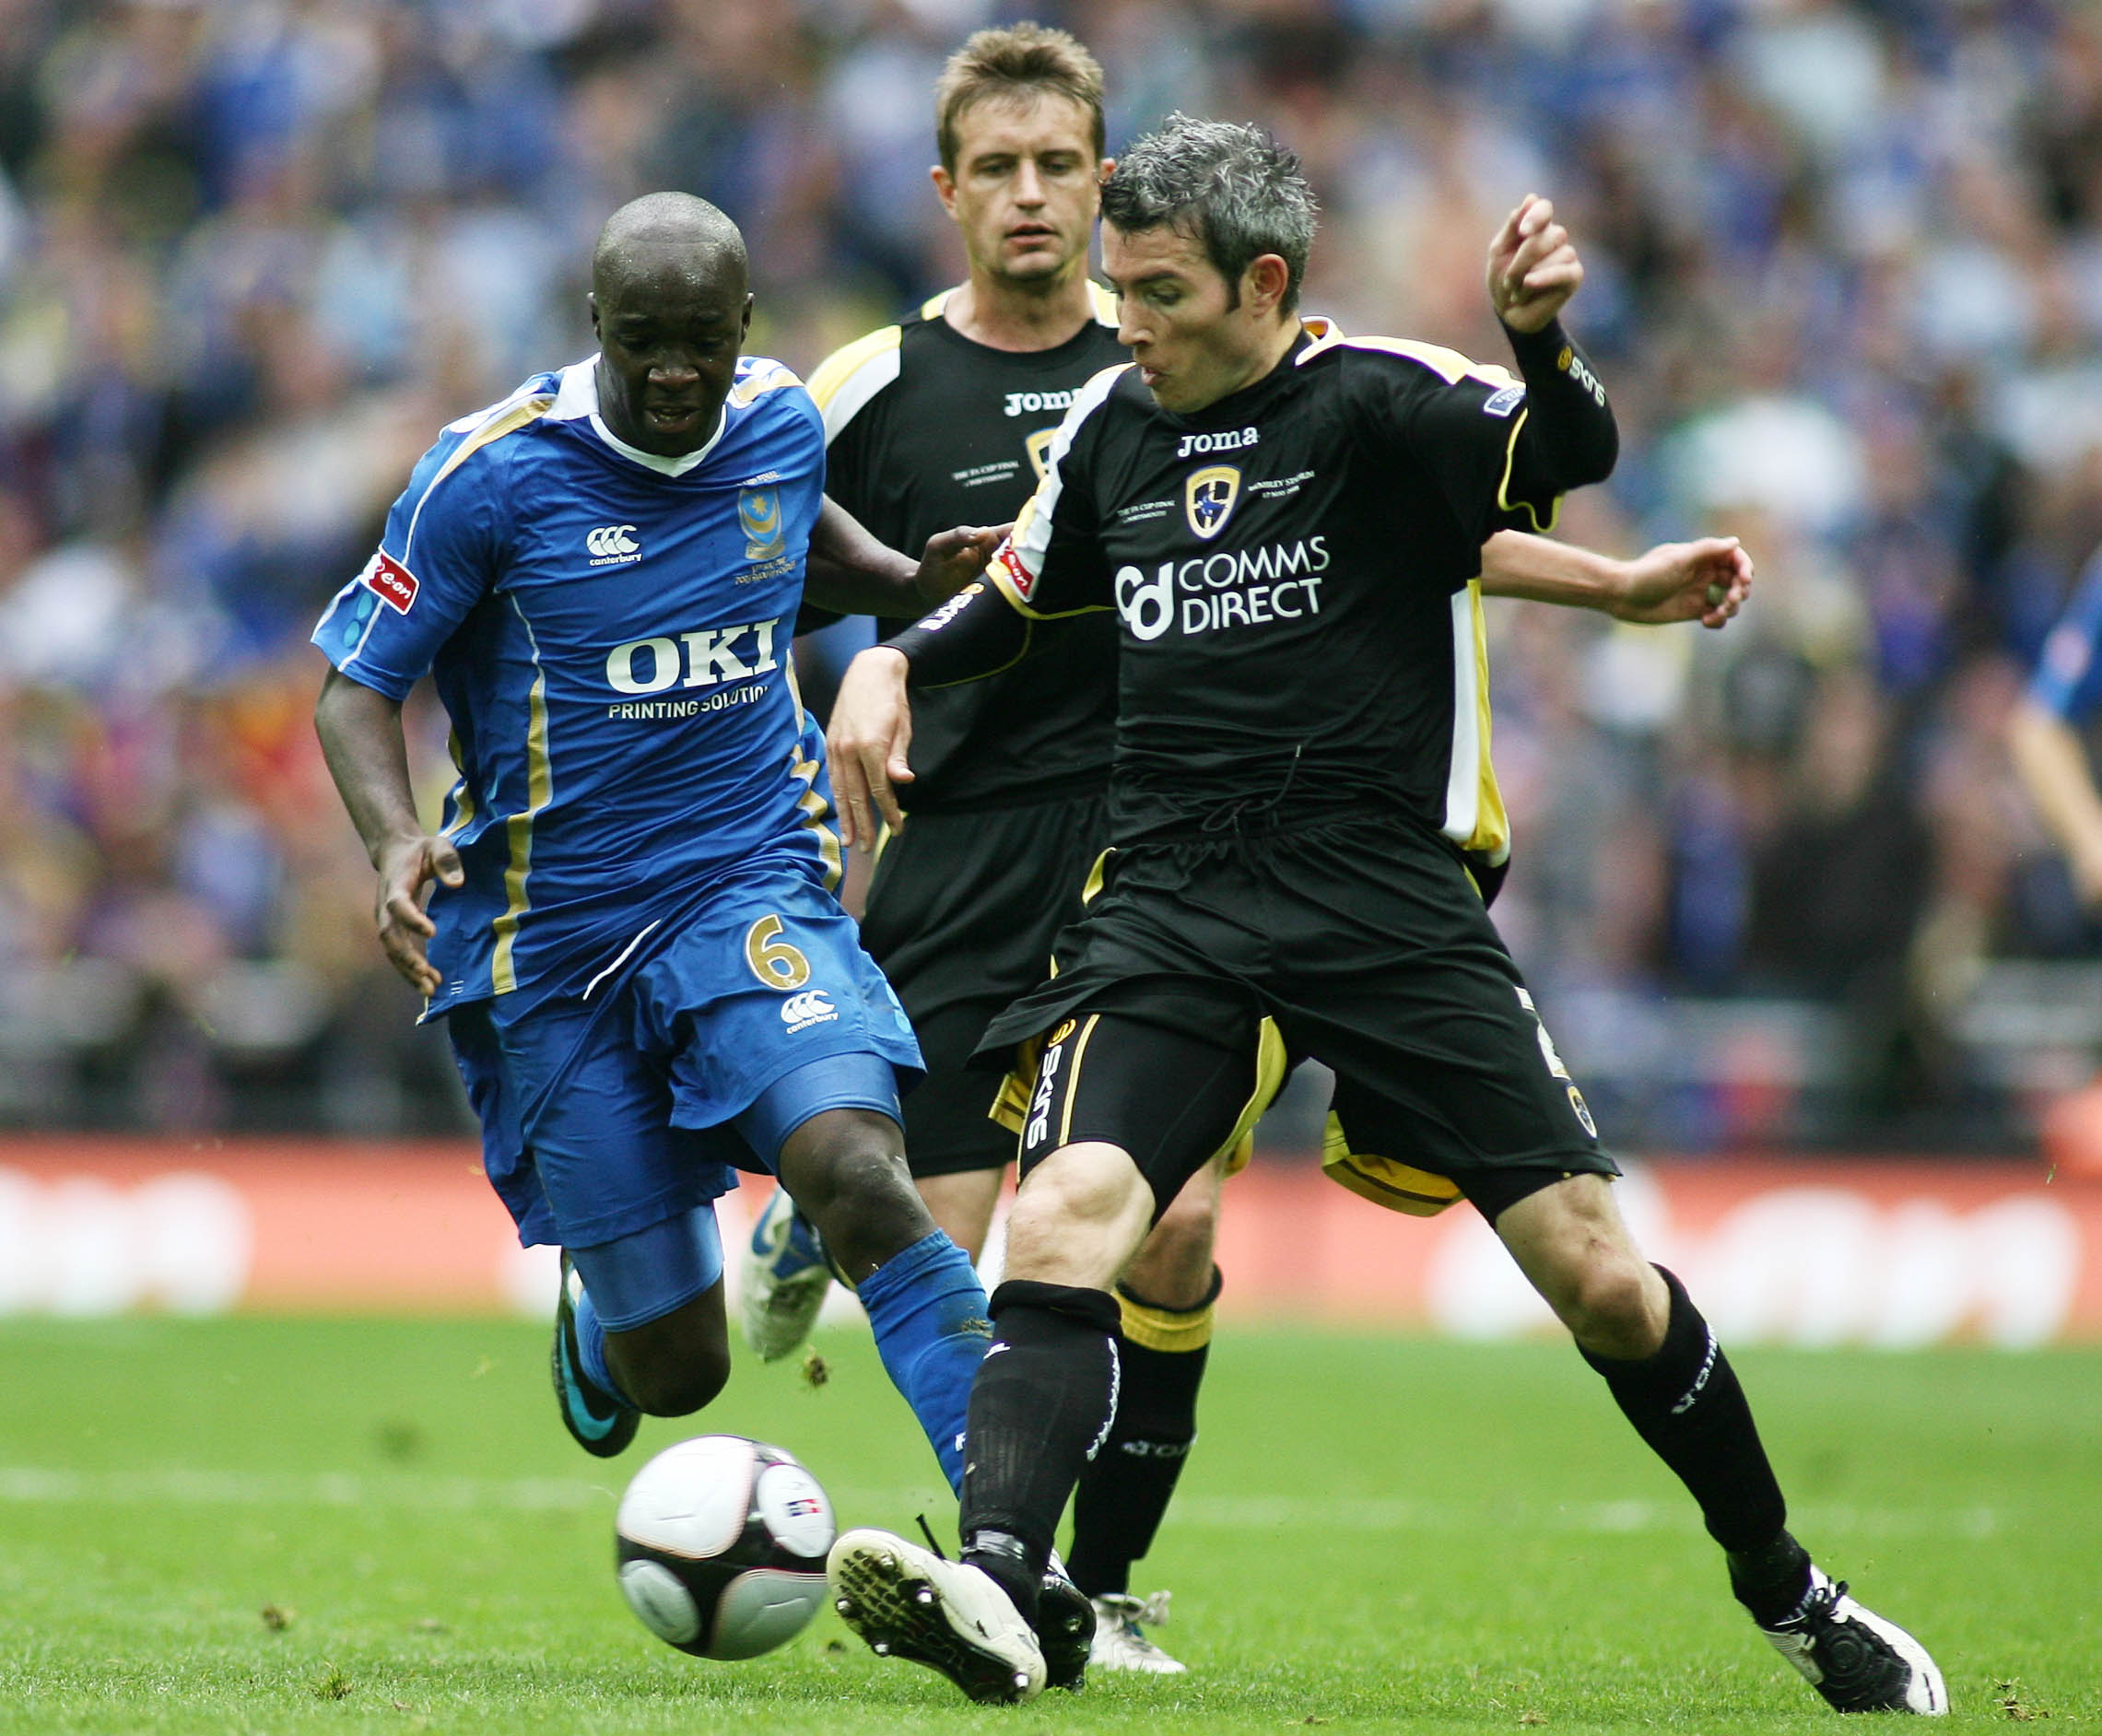 Kevin McNaughton takes on Lassana Diarra (left) in the 2008 FA Cup final